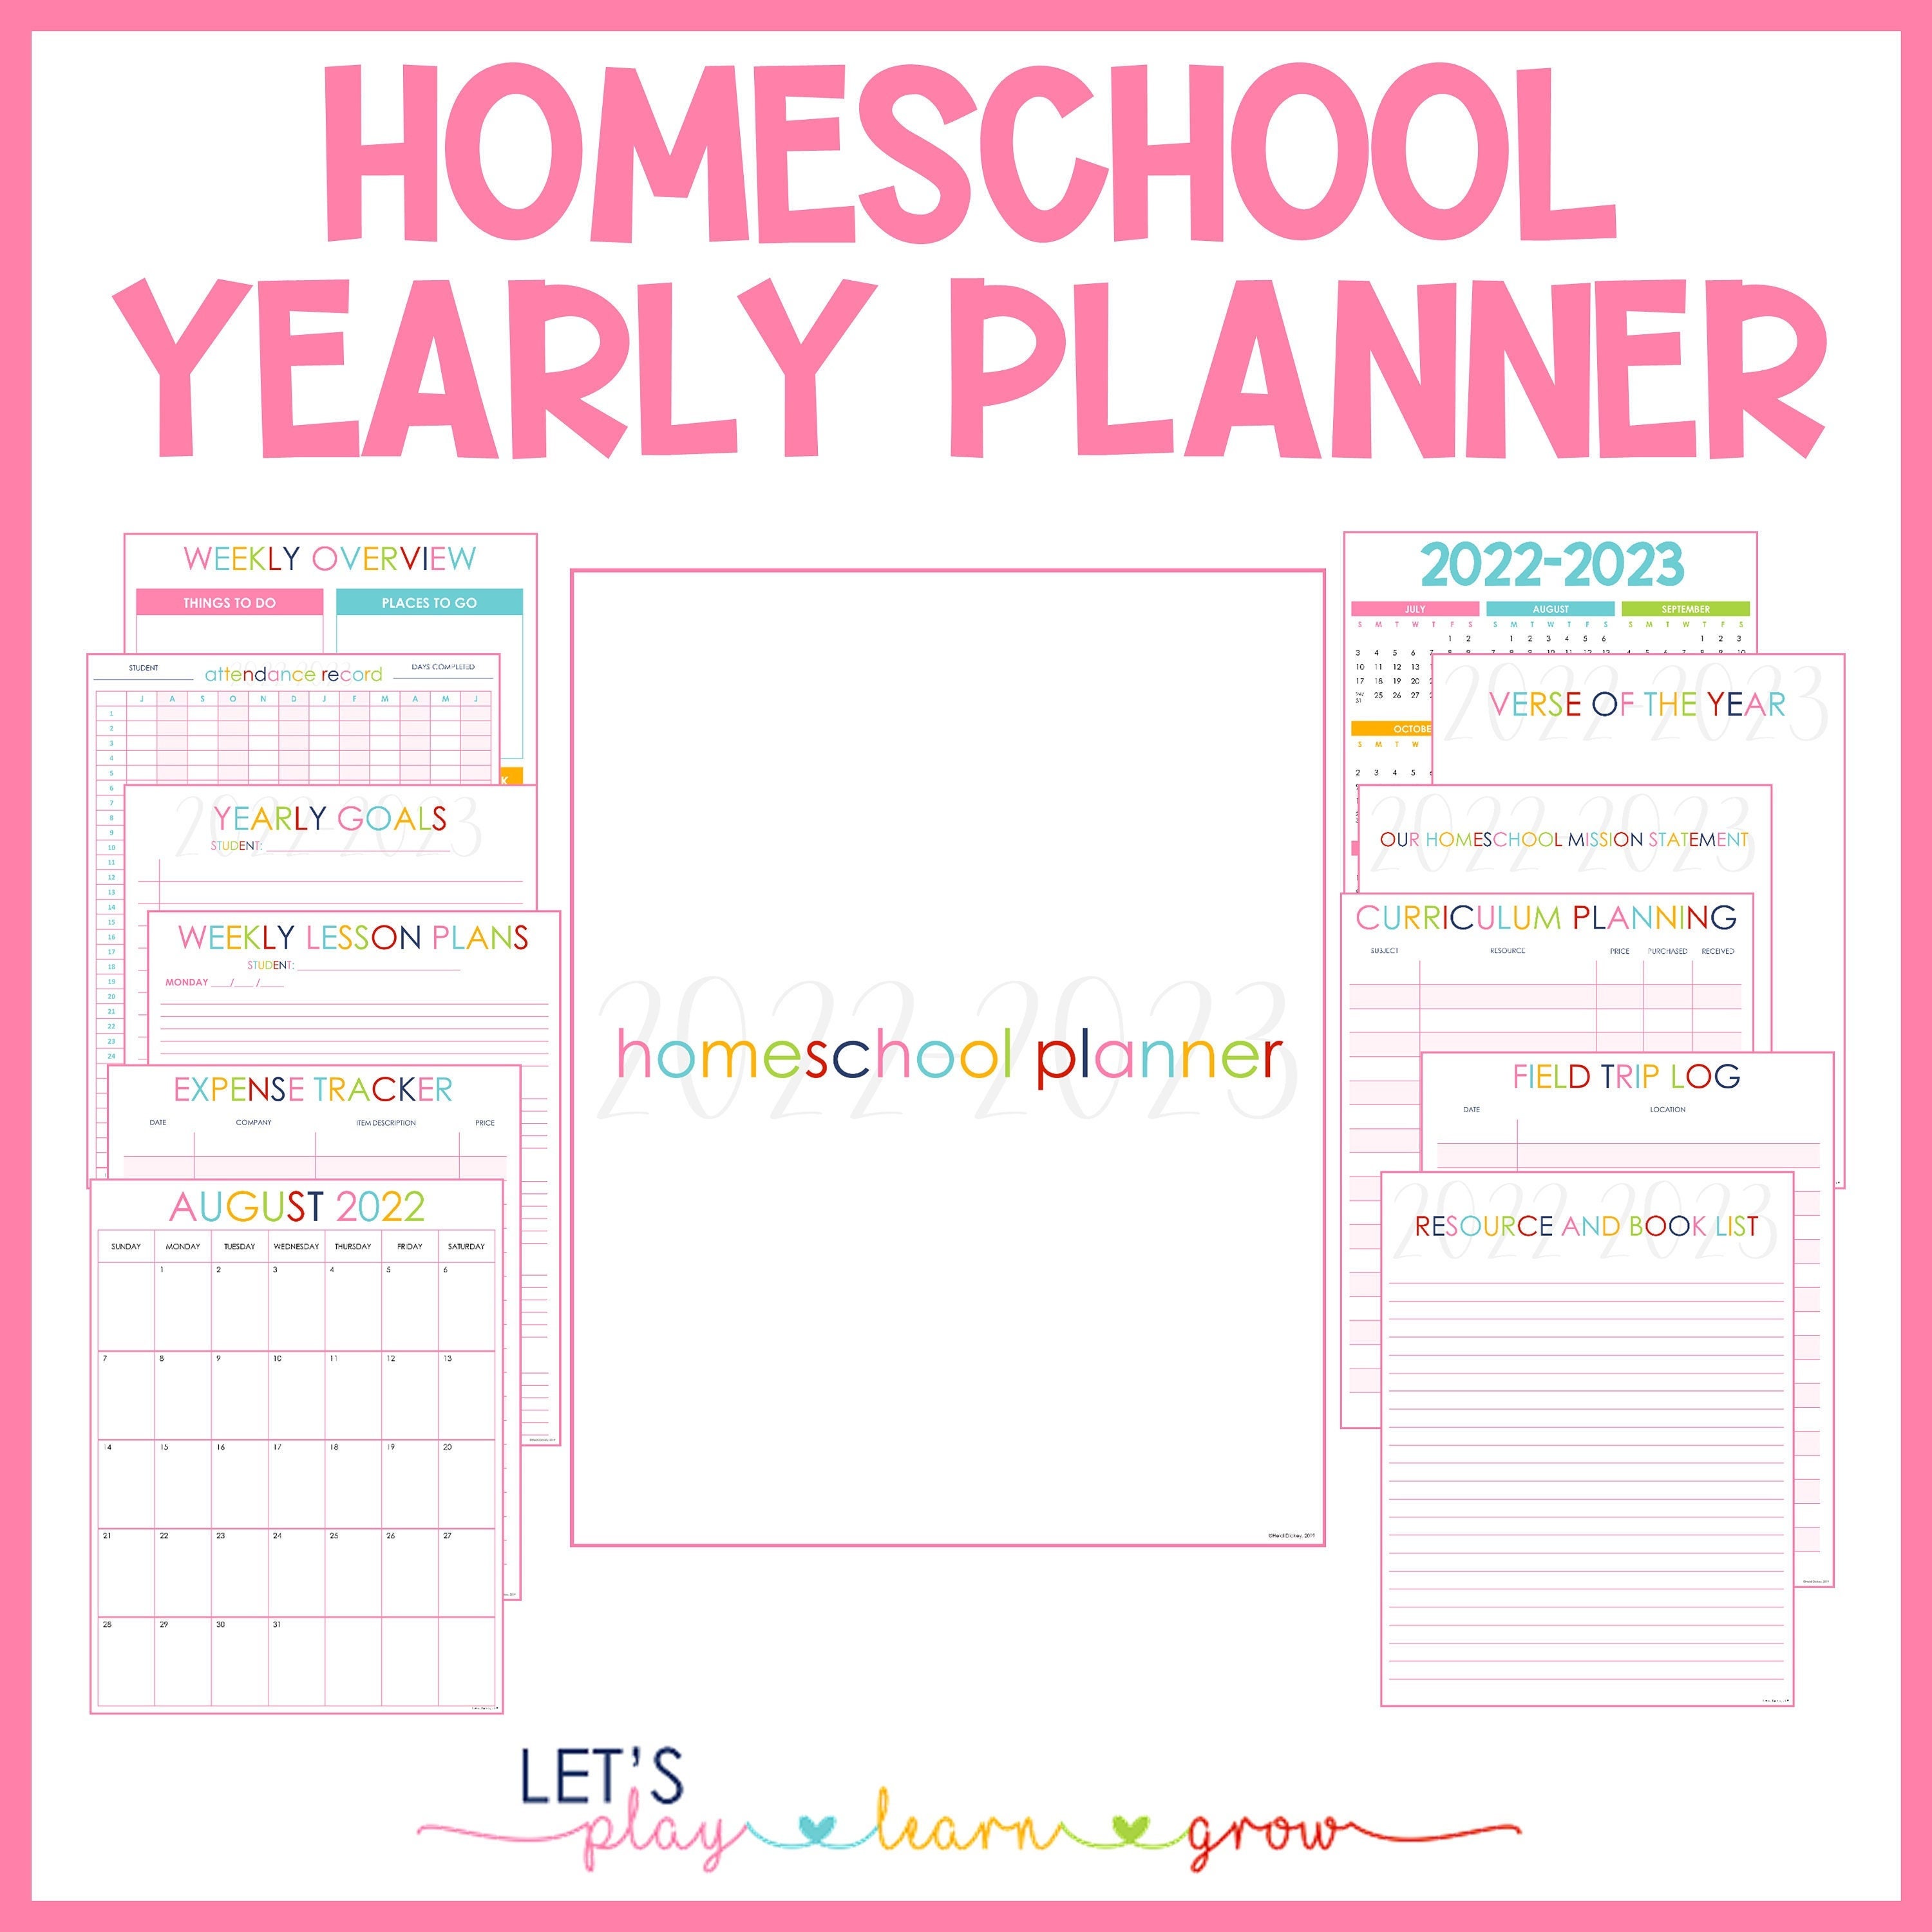 dated calendars and pages only 2021-2022 Homeschool Planning Pages Homeschool Planner refresh pages Homeschool planning DIY planner,